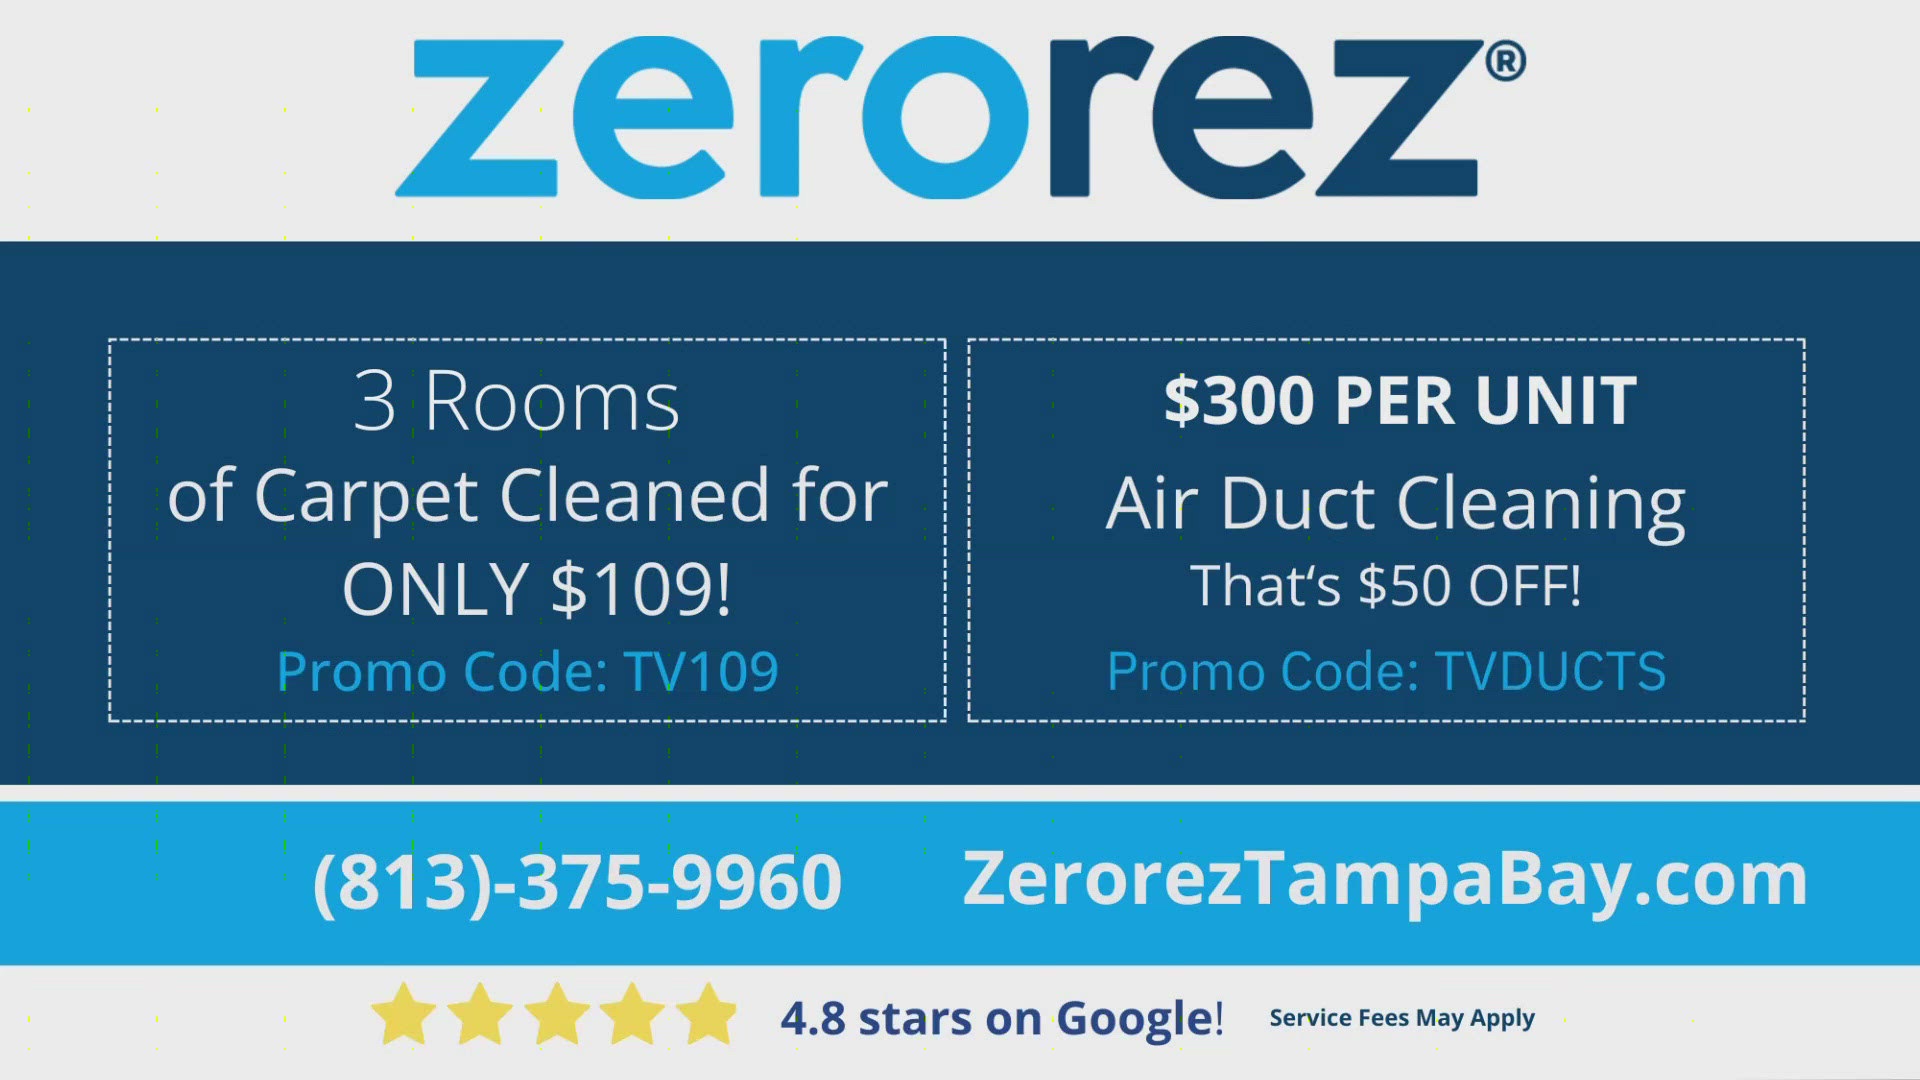 This story sponsored by: Zerorez. Zerorez is different than other carpet cleaning companies. They use a non-toxic cleaner and they clean air ducts as well.